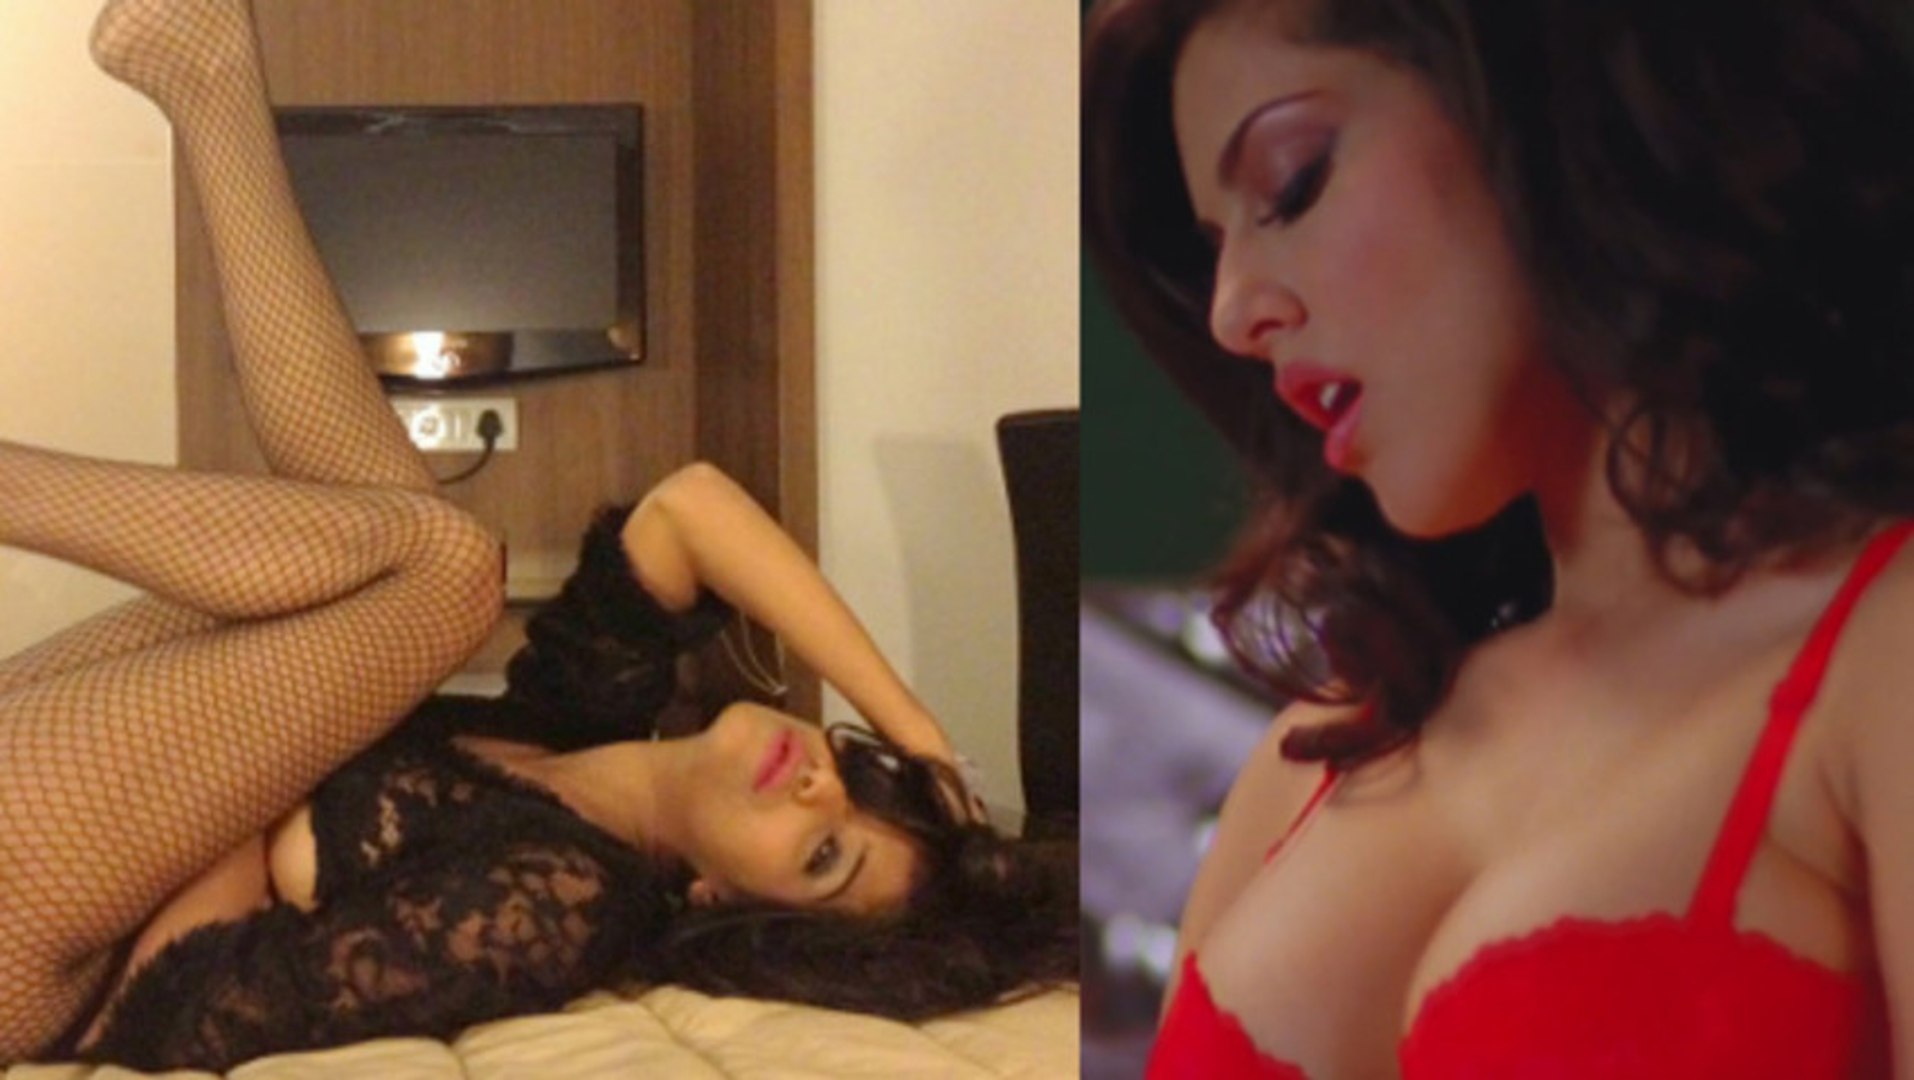 Sunny Leone And Poonam Pandey Fuck Videos - Poonam Pandey Copies Sunny Leone's Sex Postures - video Dailymotion